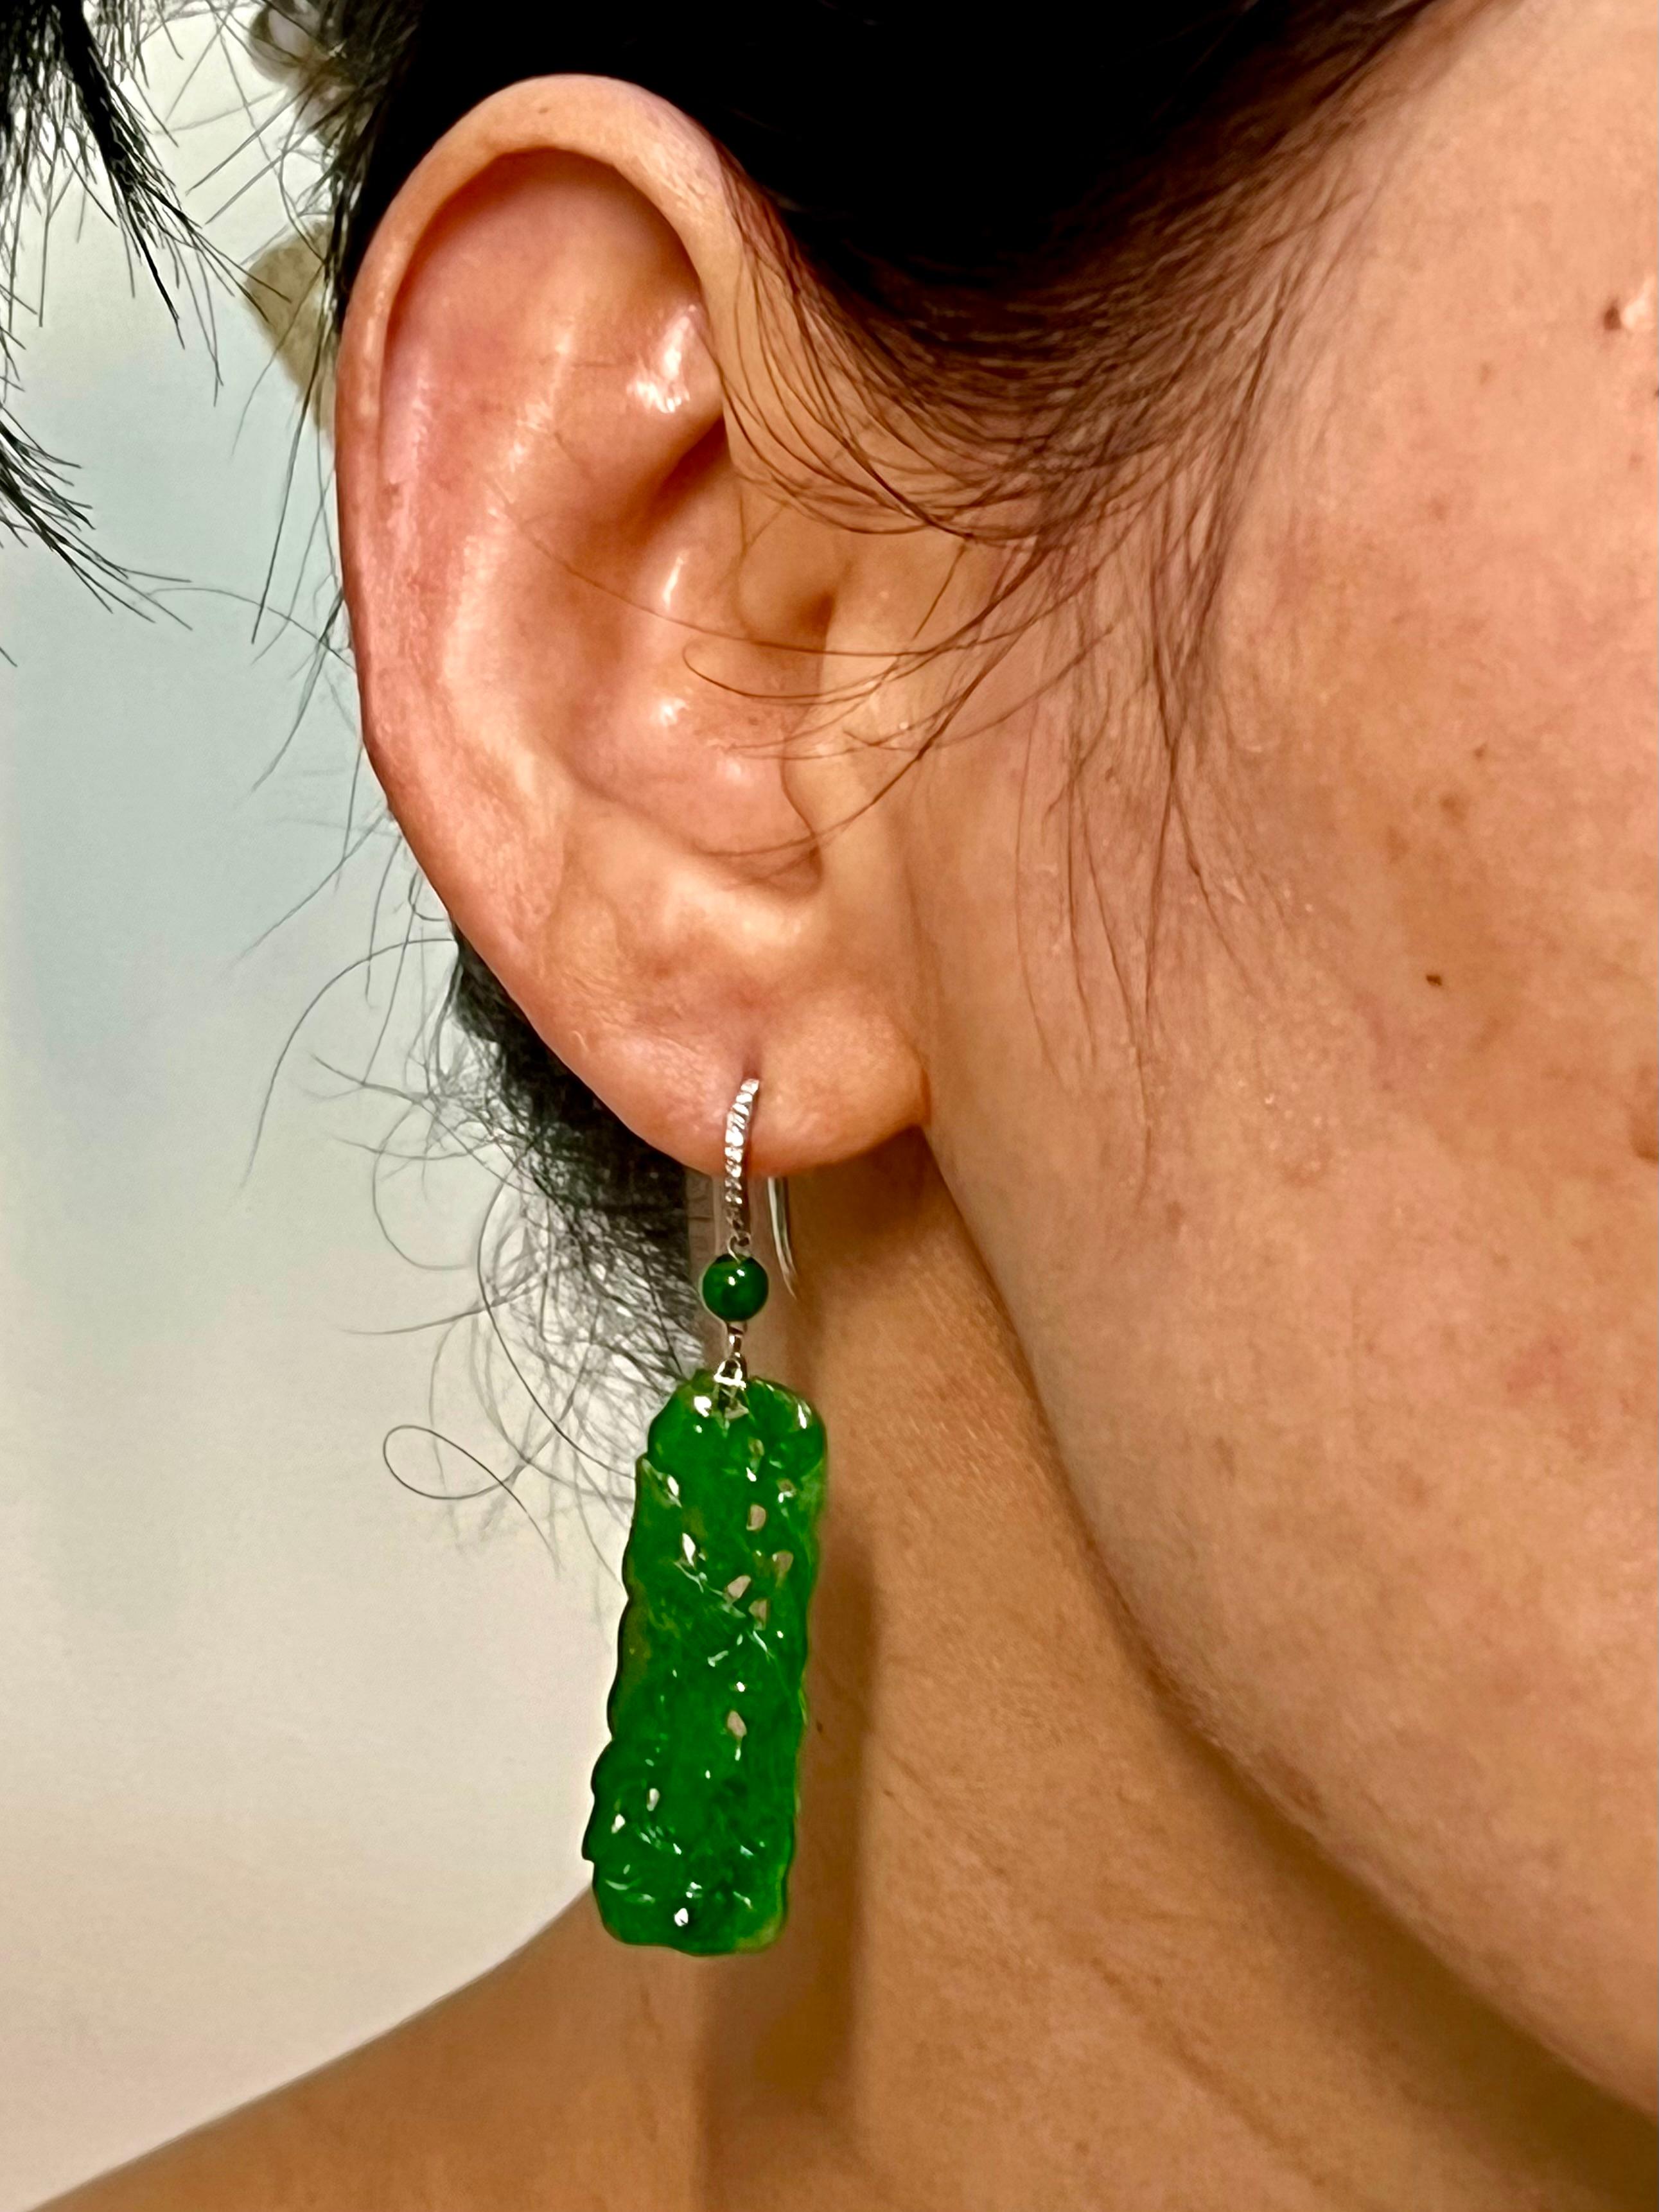 Please check out the HD video. Vintage design using old materials. Here is a nice pair of well carved Jade and diamond earrings. Both earrings are set in platinum, diamonds and jade beads. The intense apple green borderlines imperial green color.